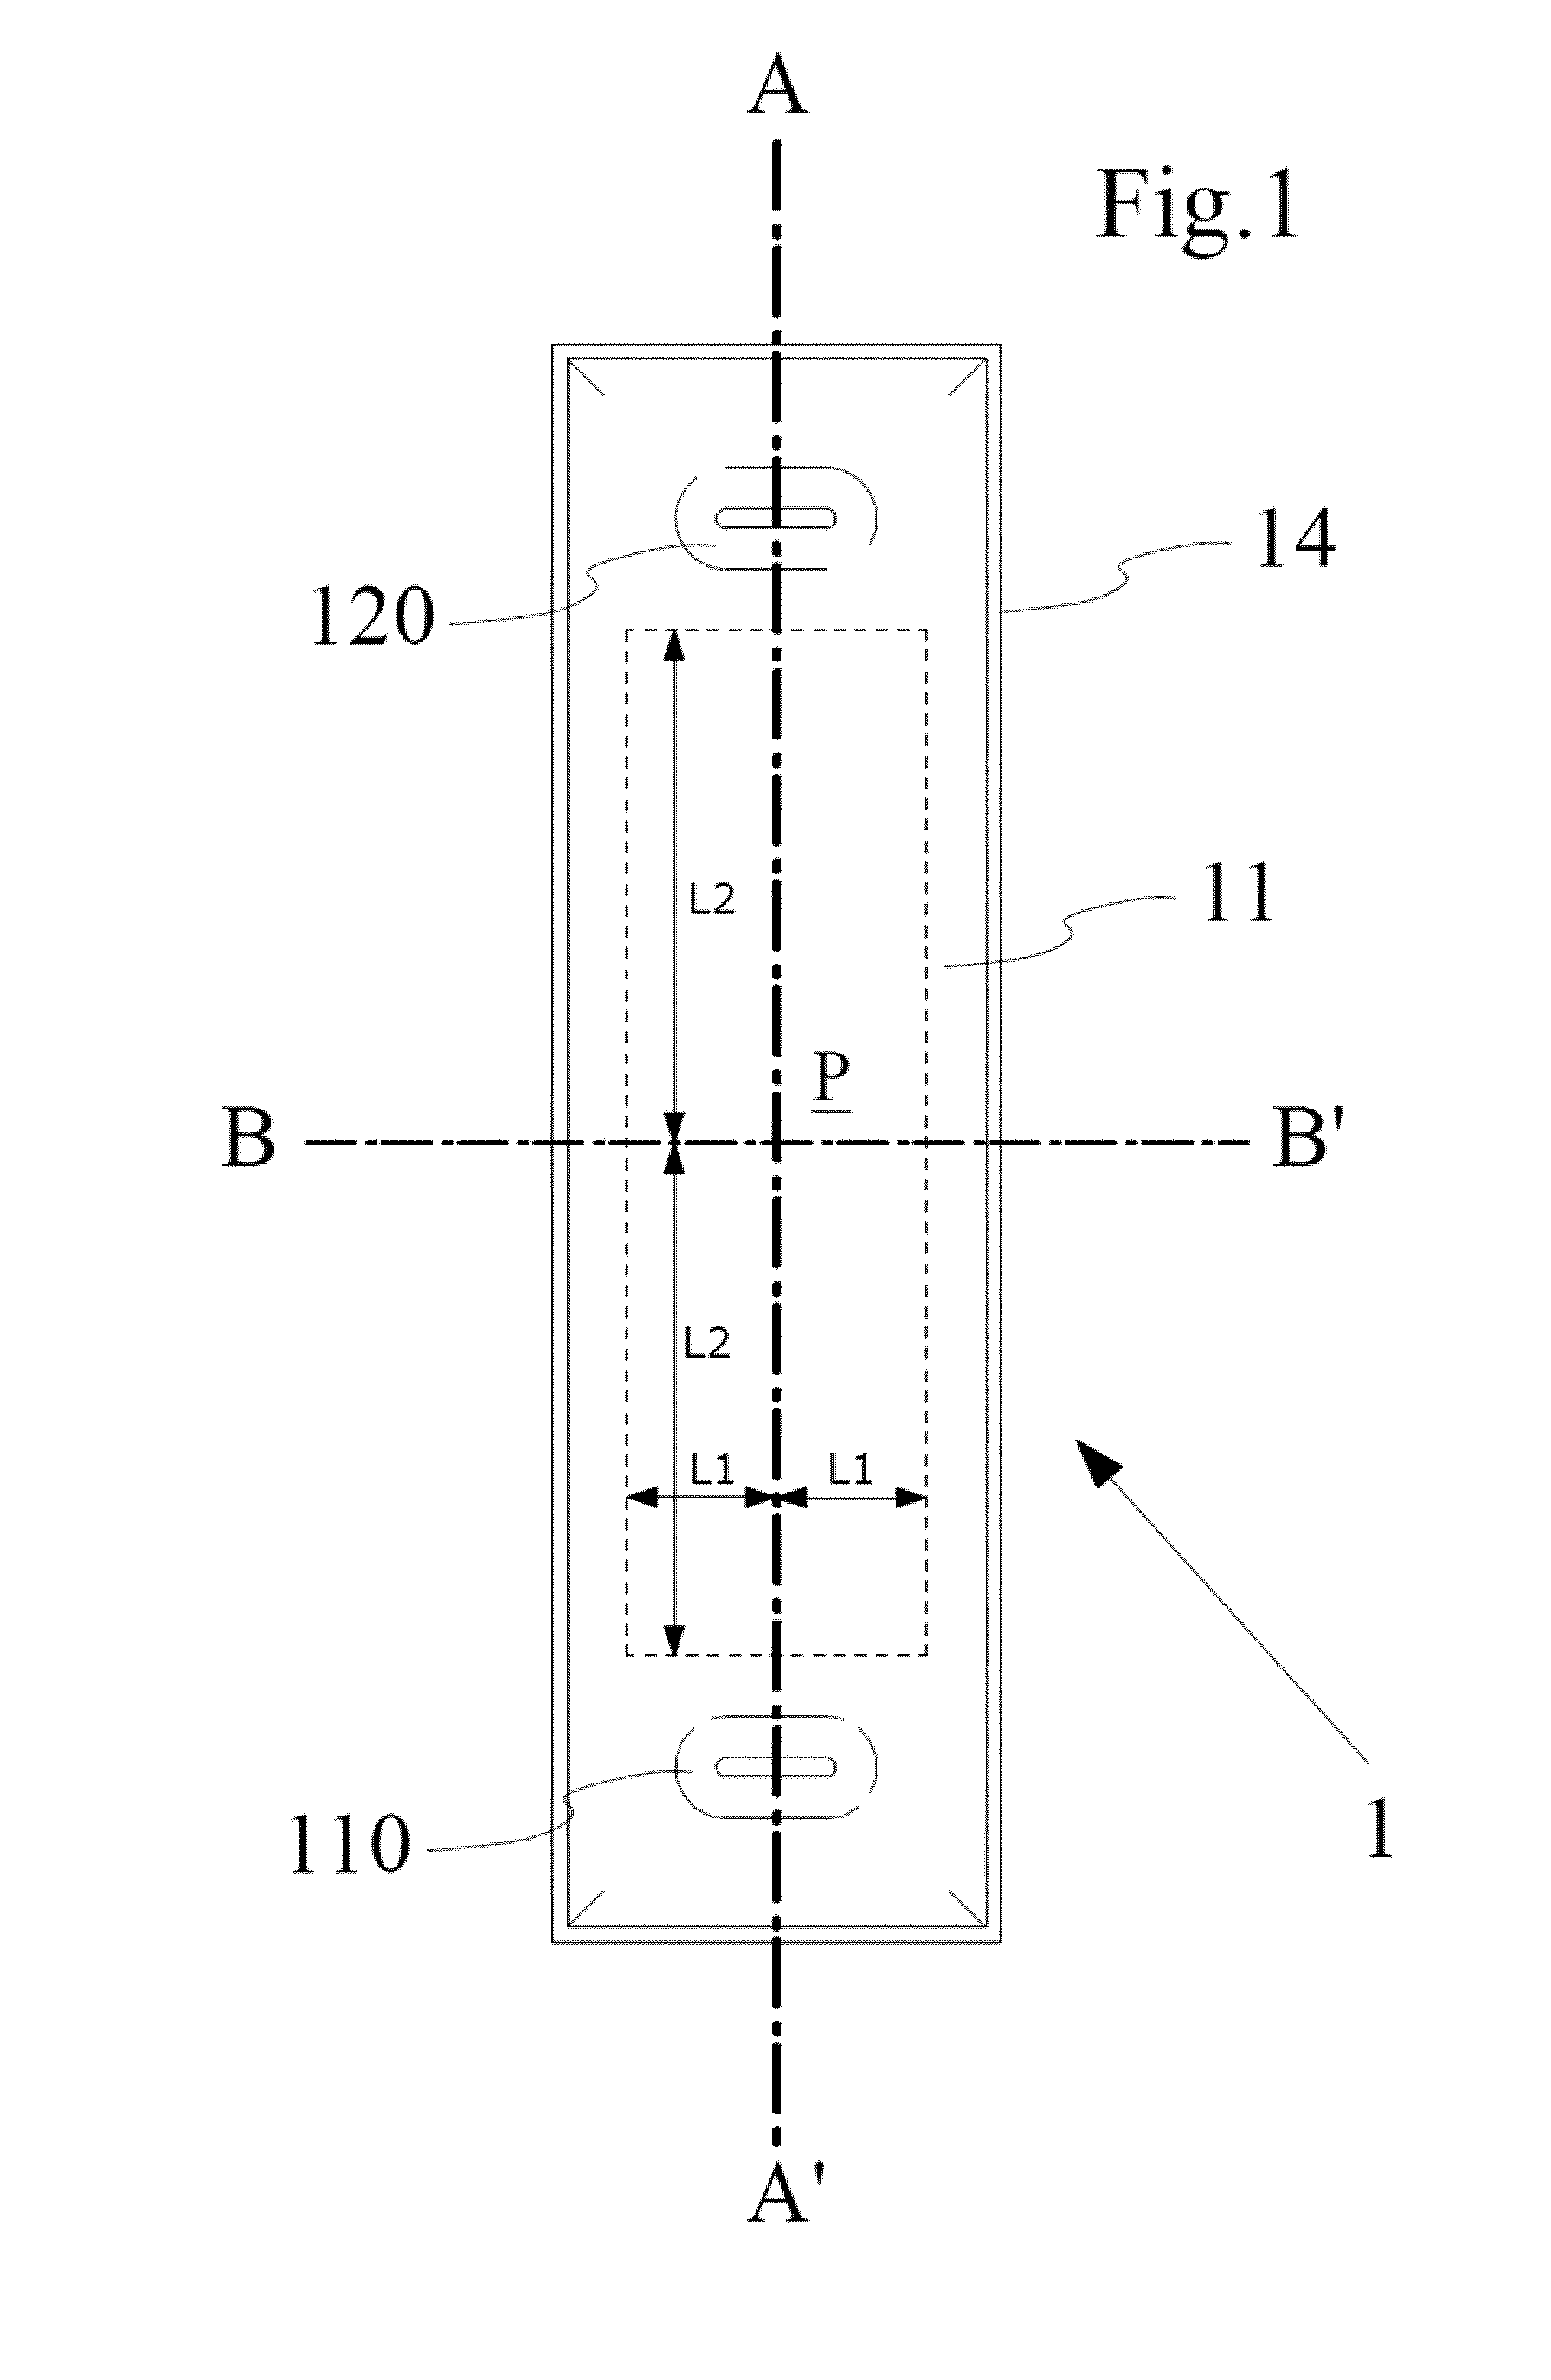 Sound-absorbing panel and associated manufacturing method